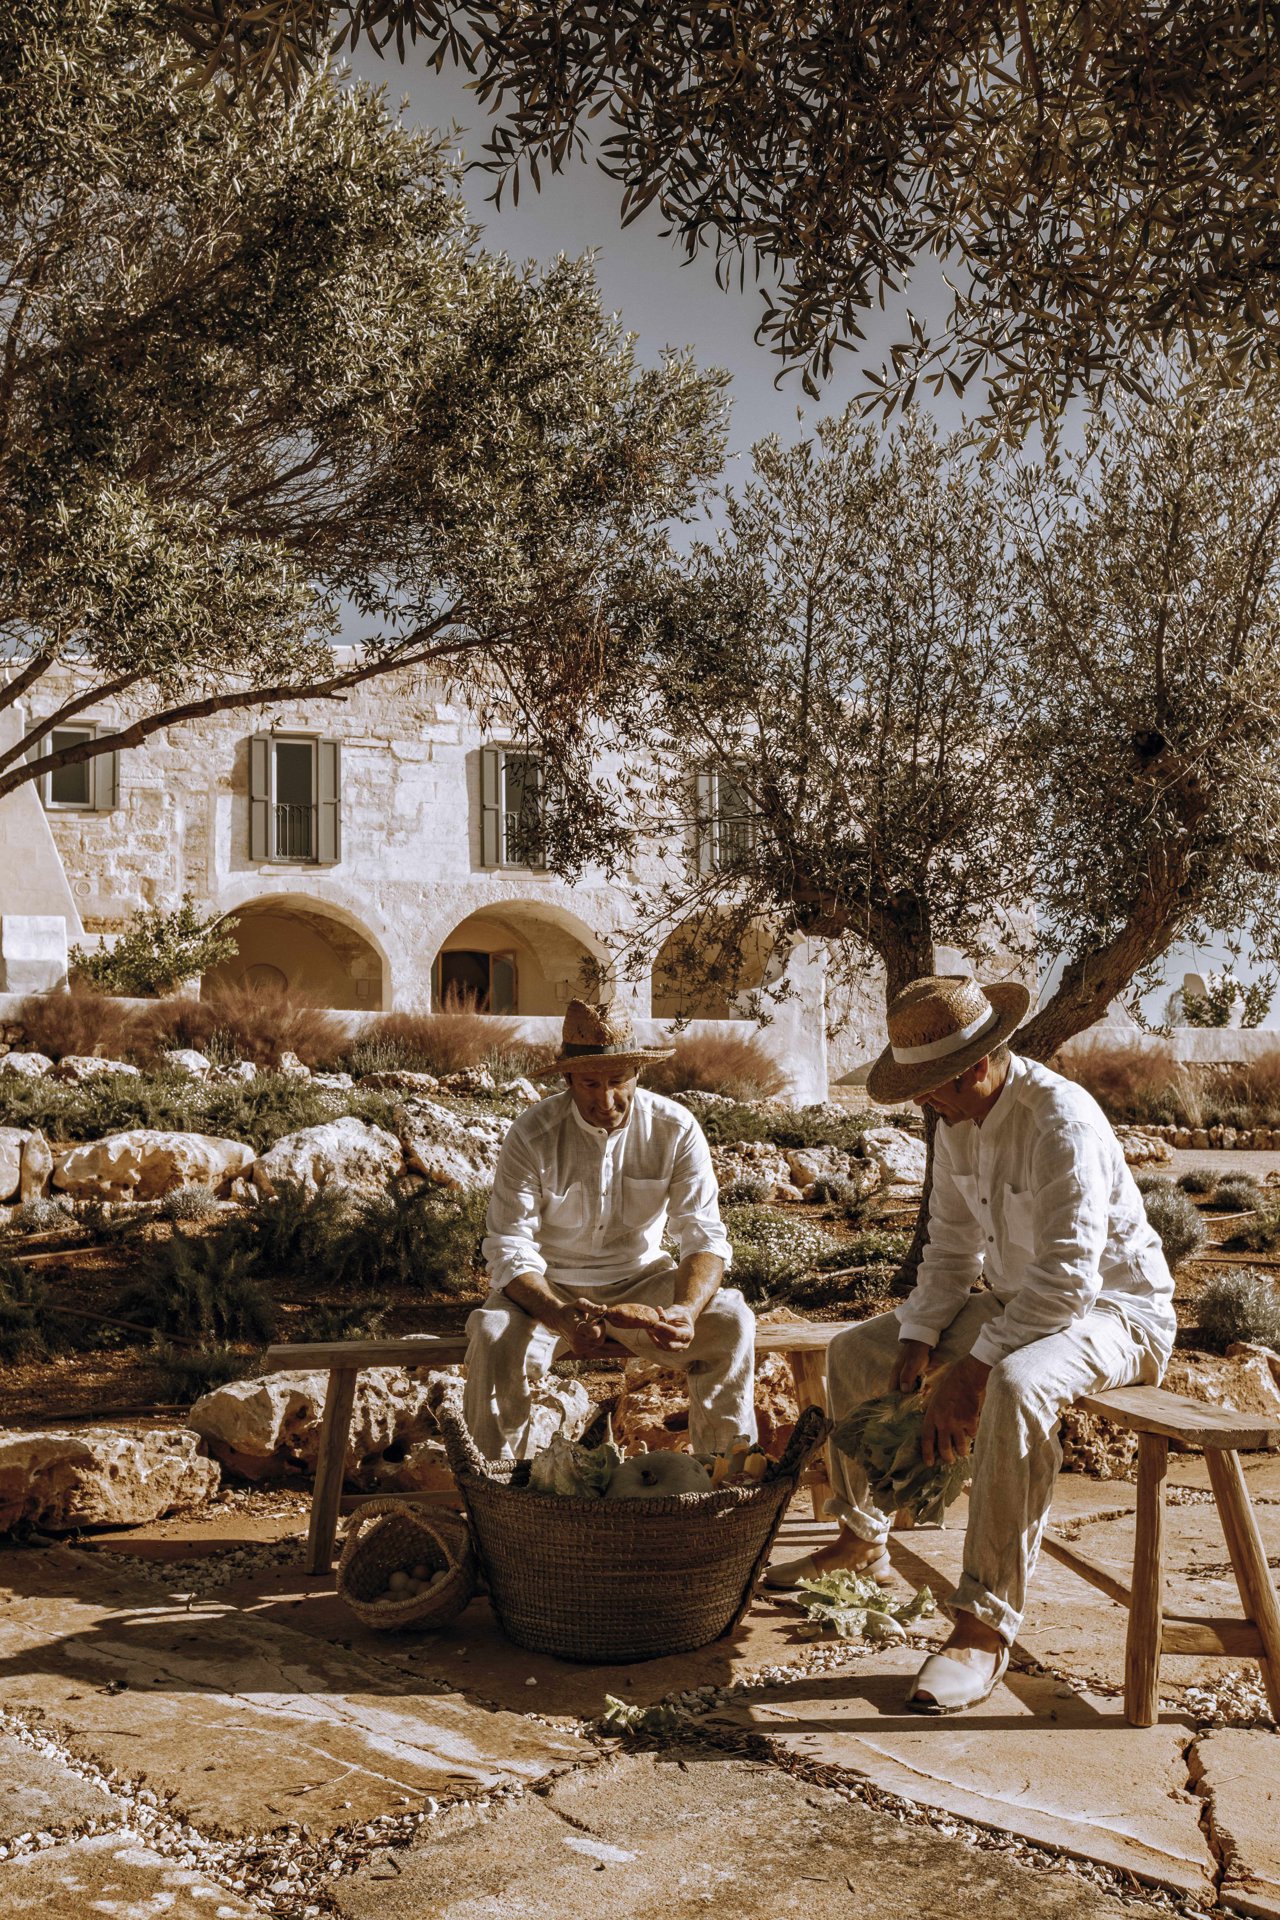 Zisco And Josep, Two Farmers Working The Field, On A Terrace In Front Of A House